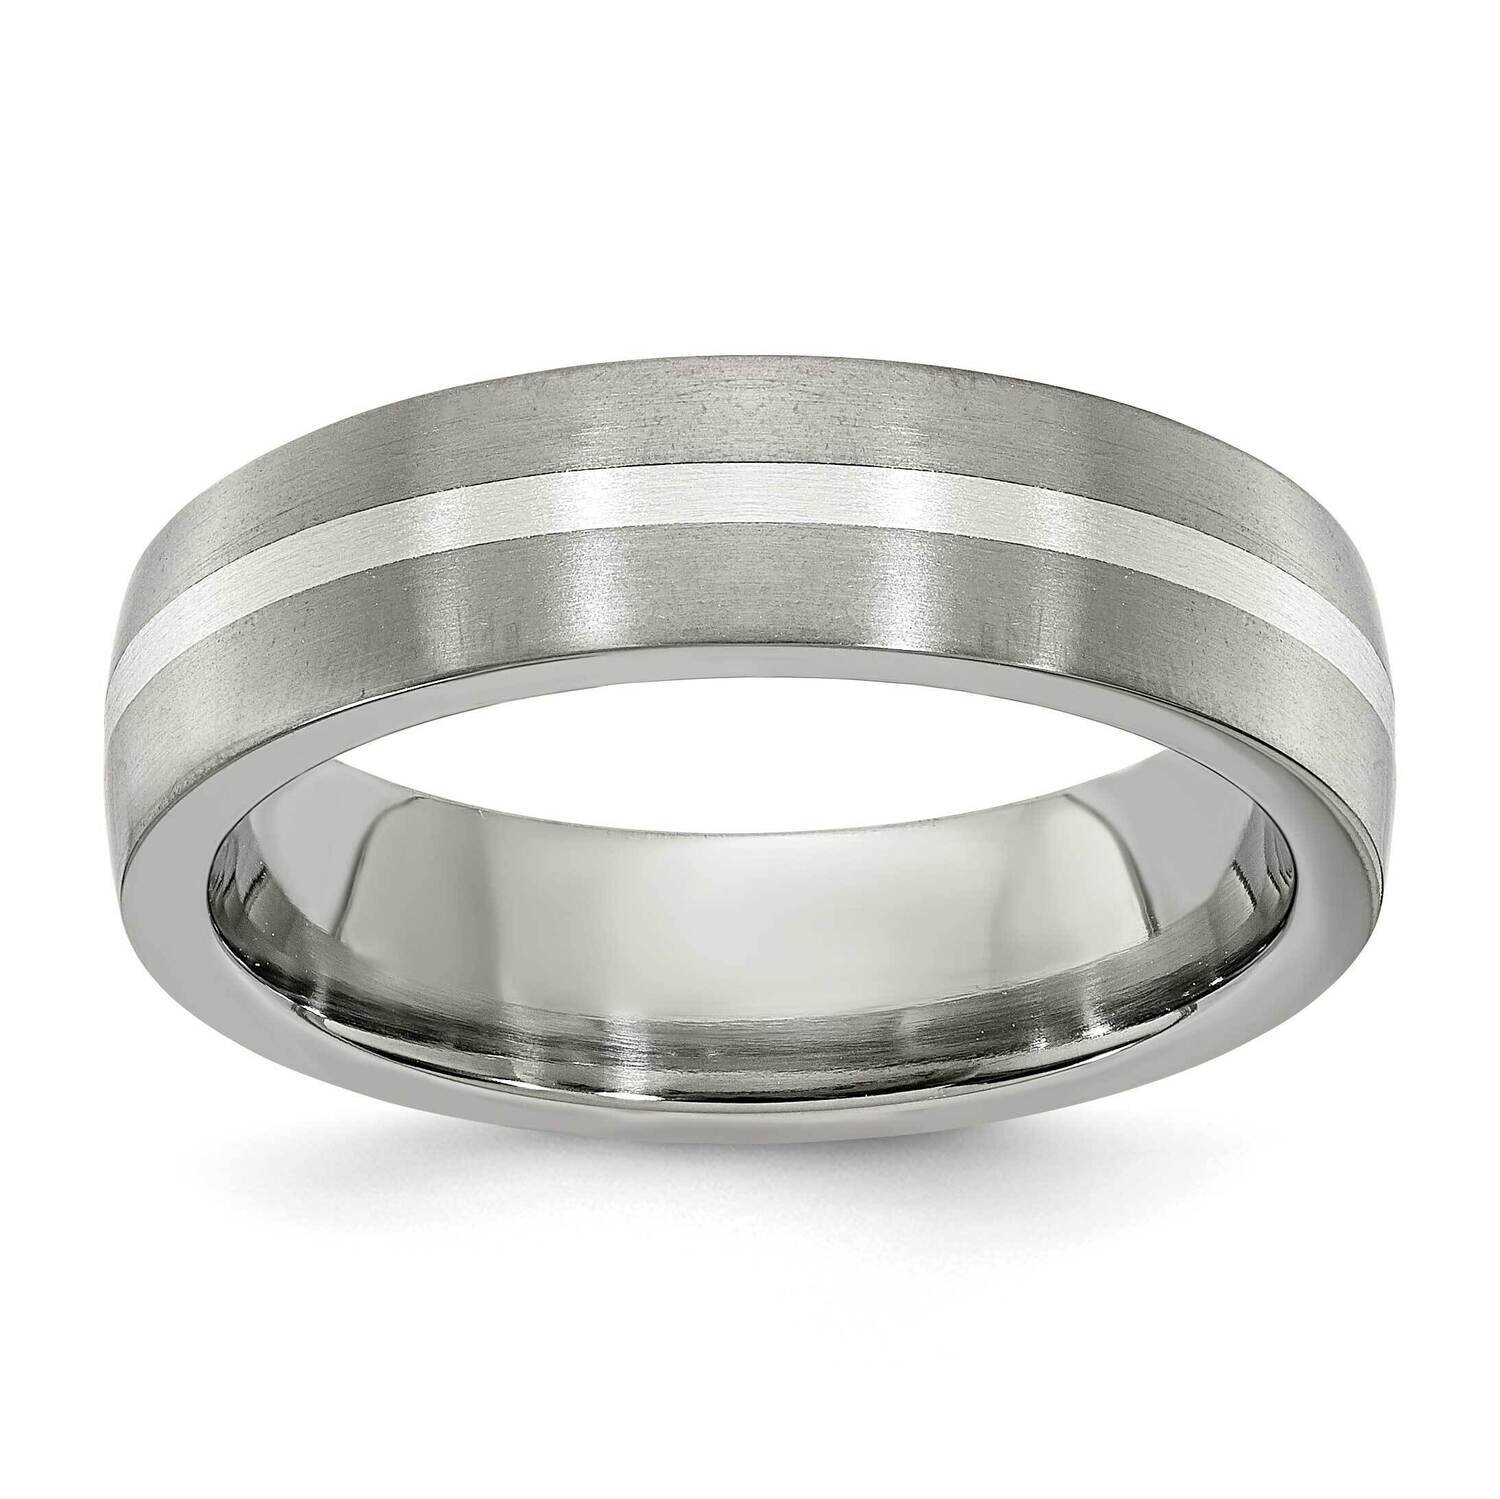 Edward Mirell Gray Ti with Sterling Silver Inlay 6mm Engravable Band EMR362